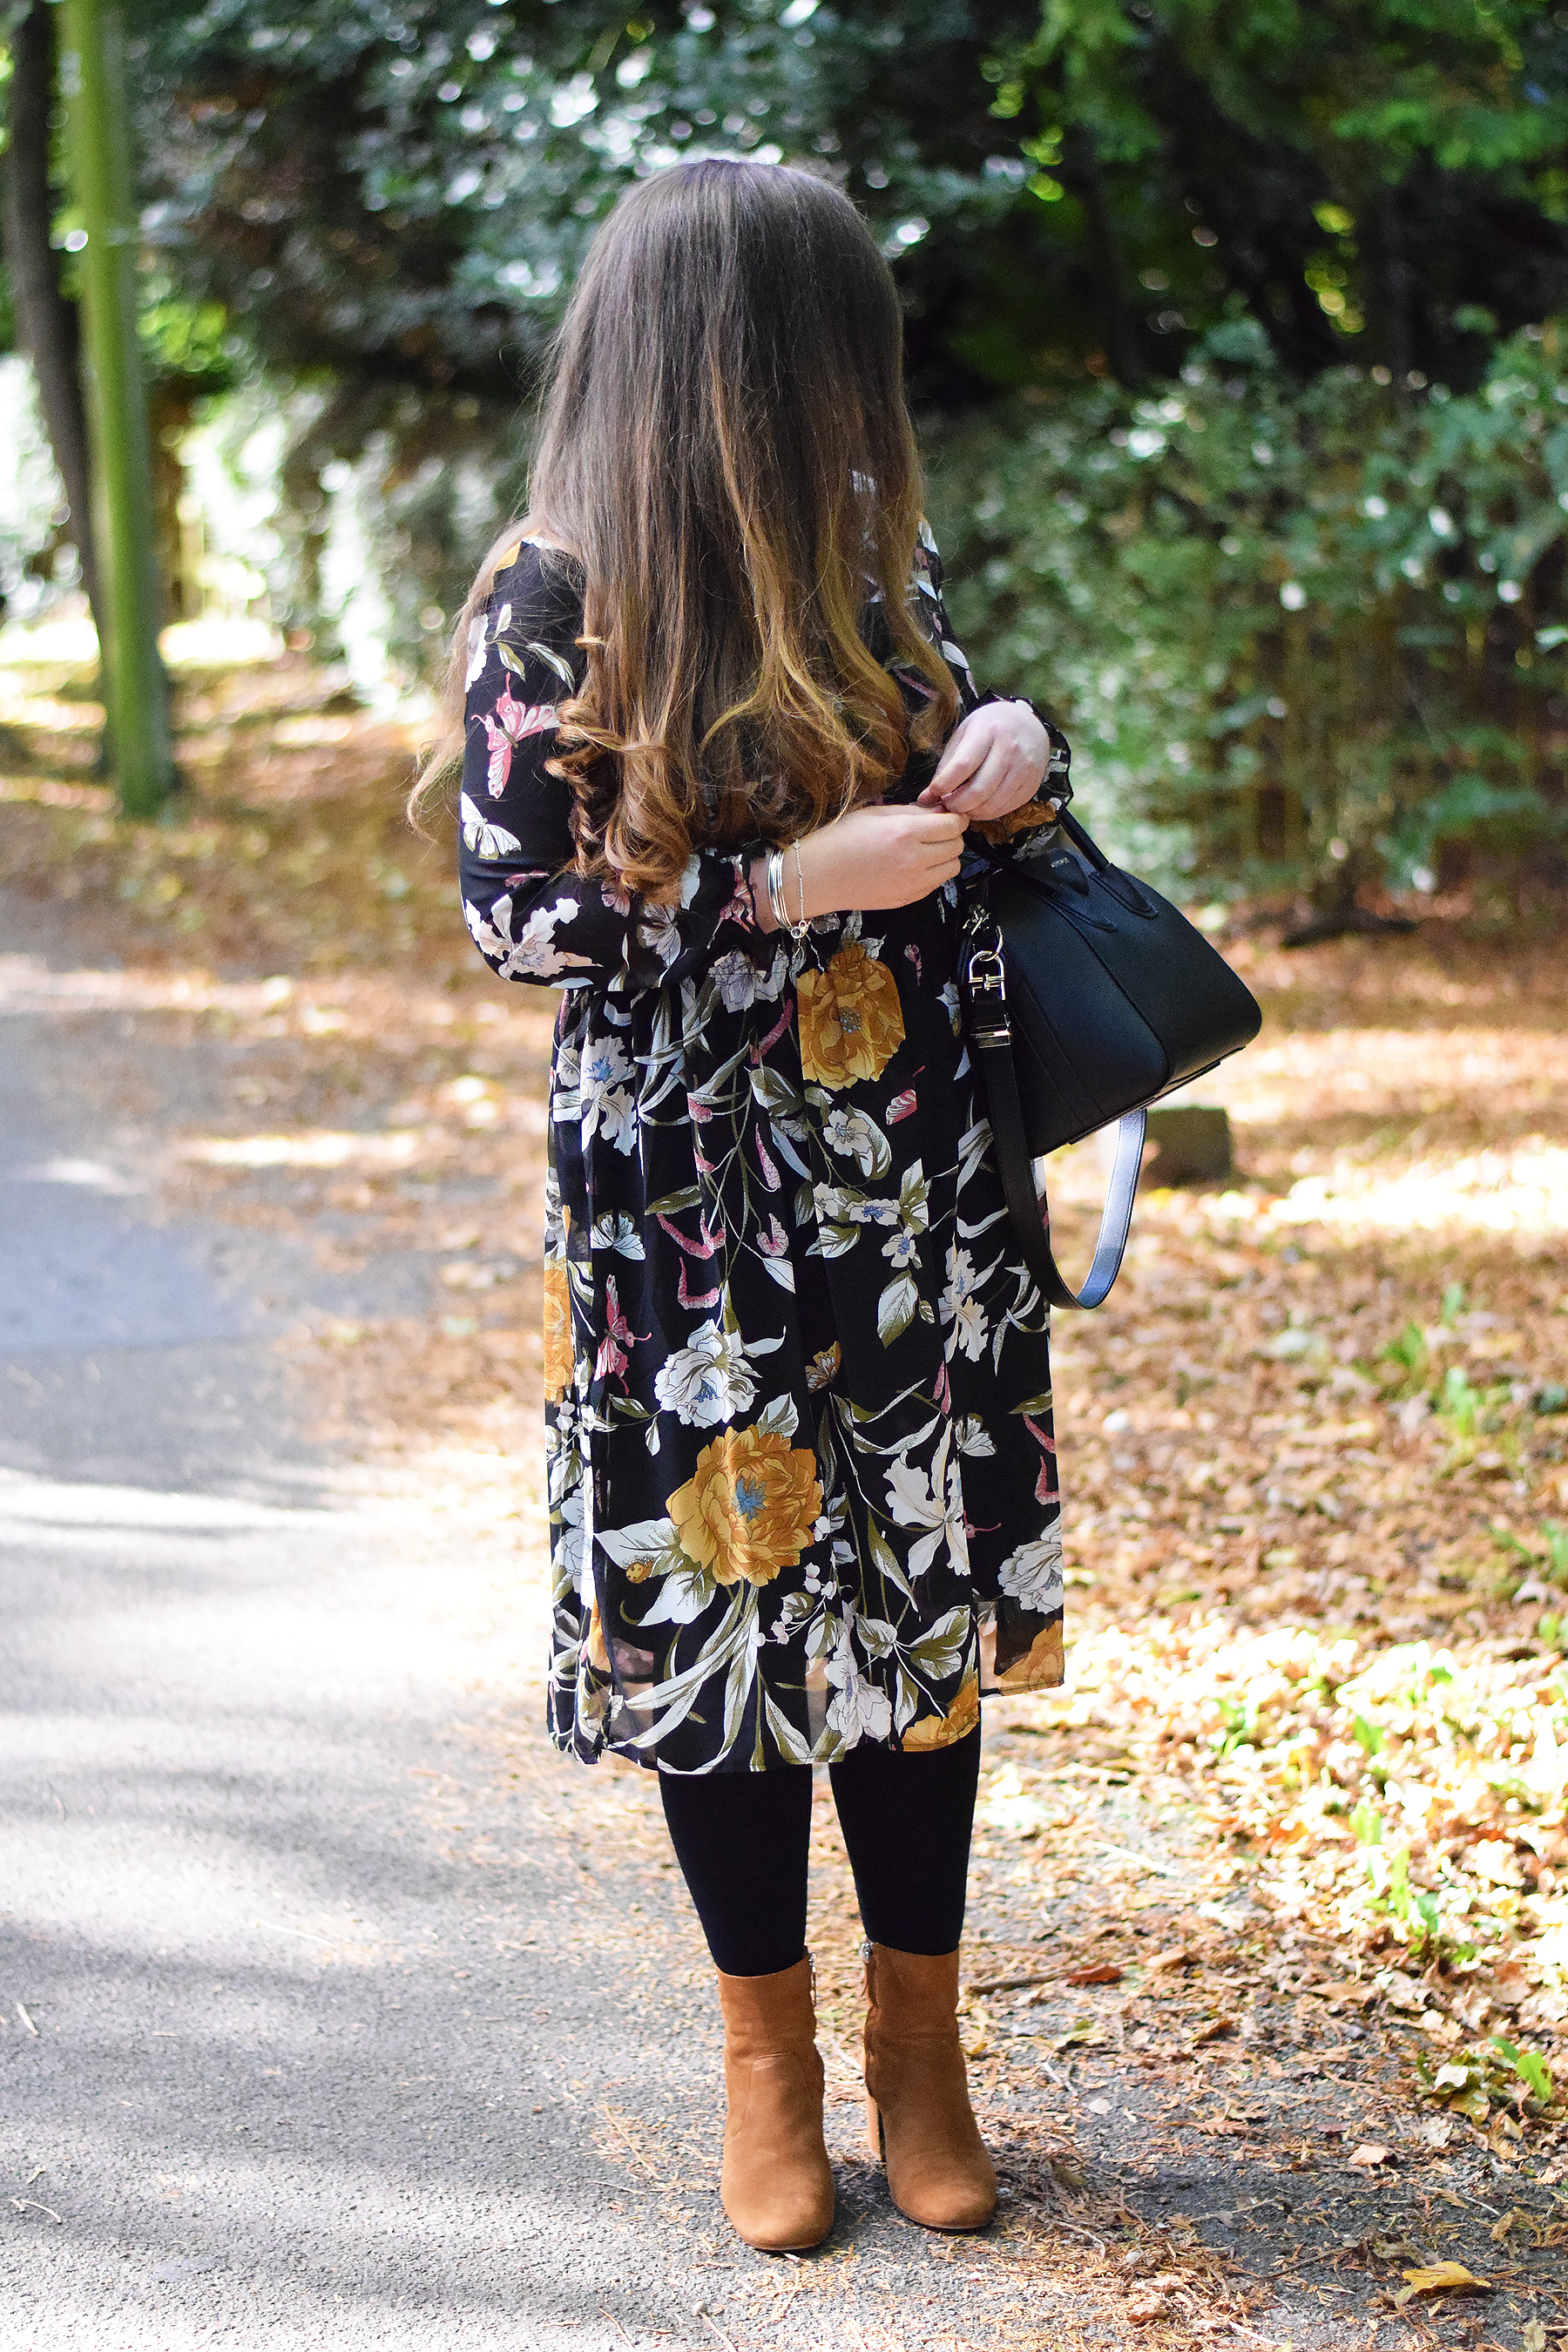 Black floral dress with orange and white